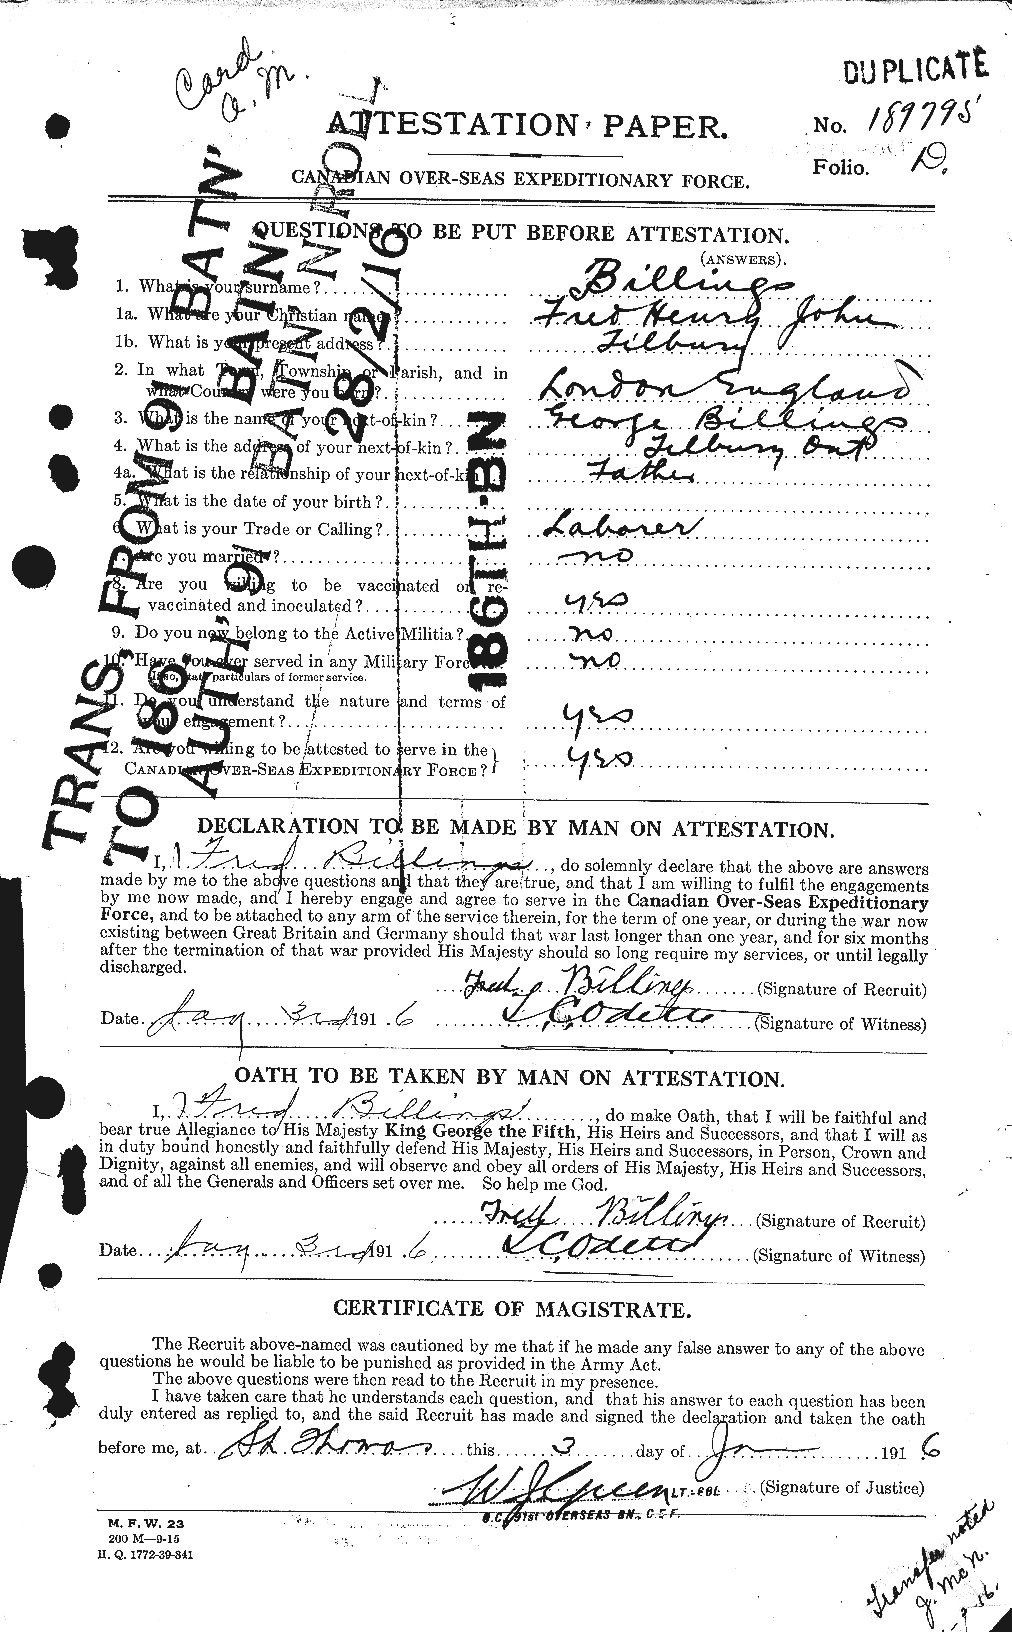 Personnel Records of the First World War - CEF 238249a